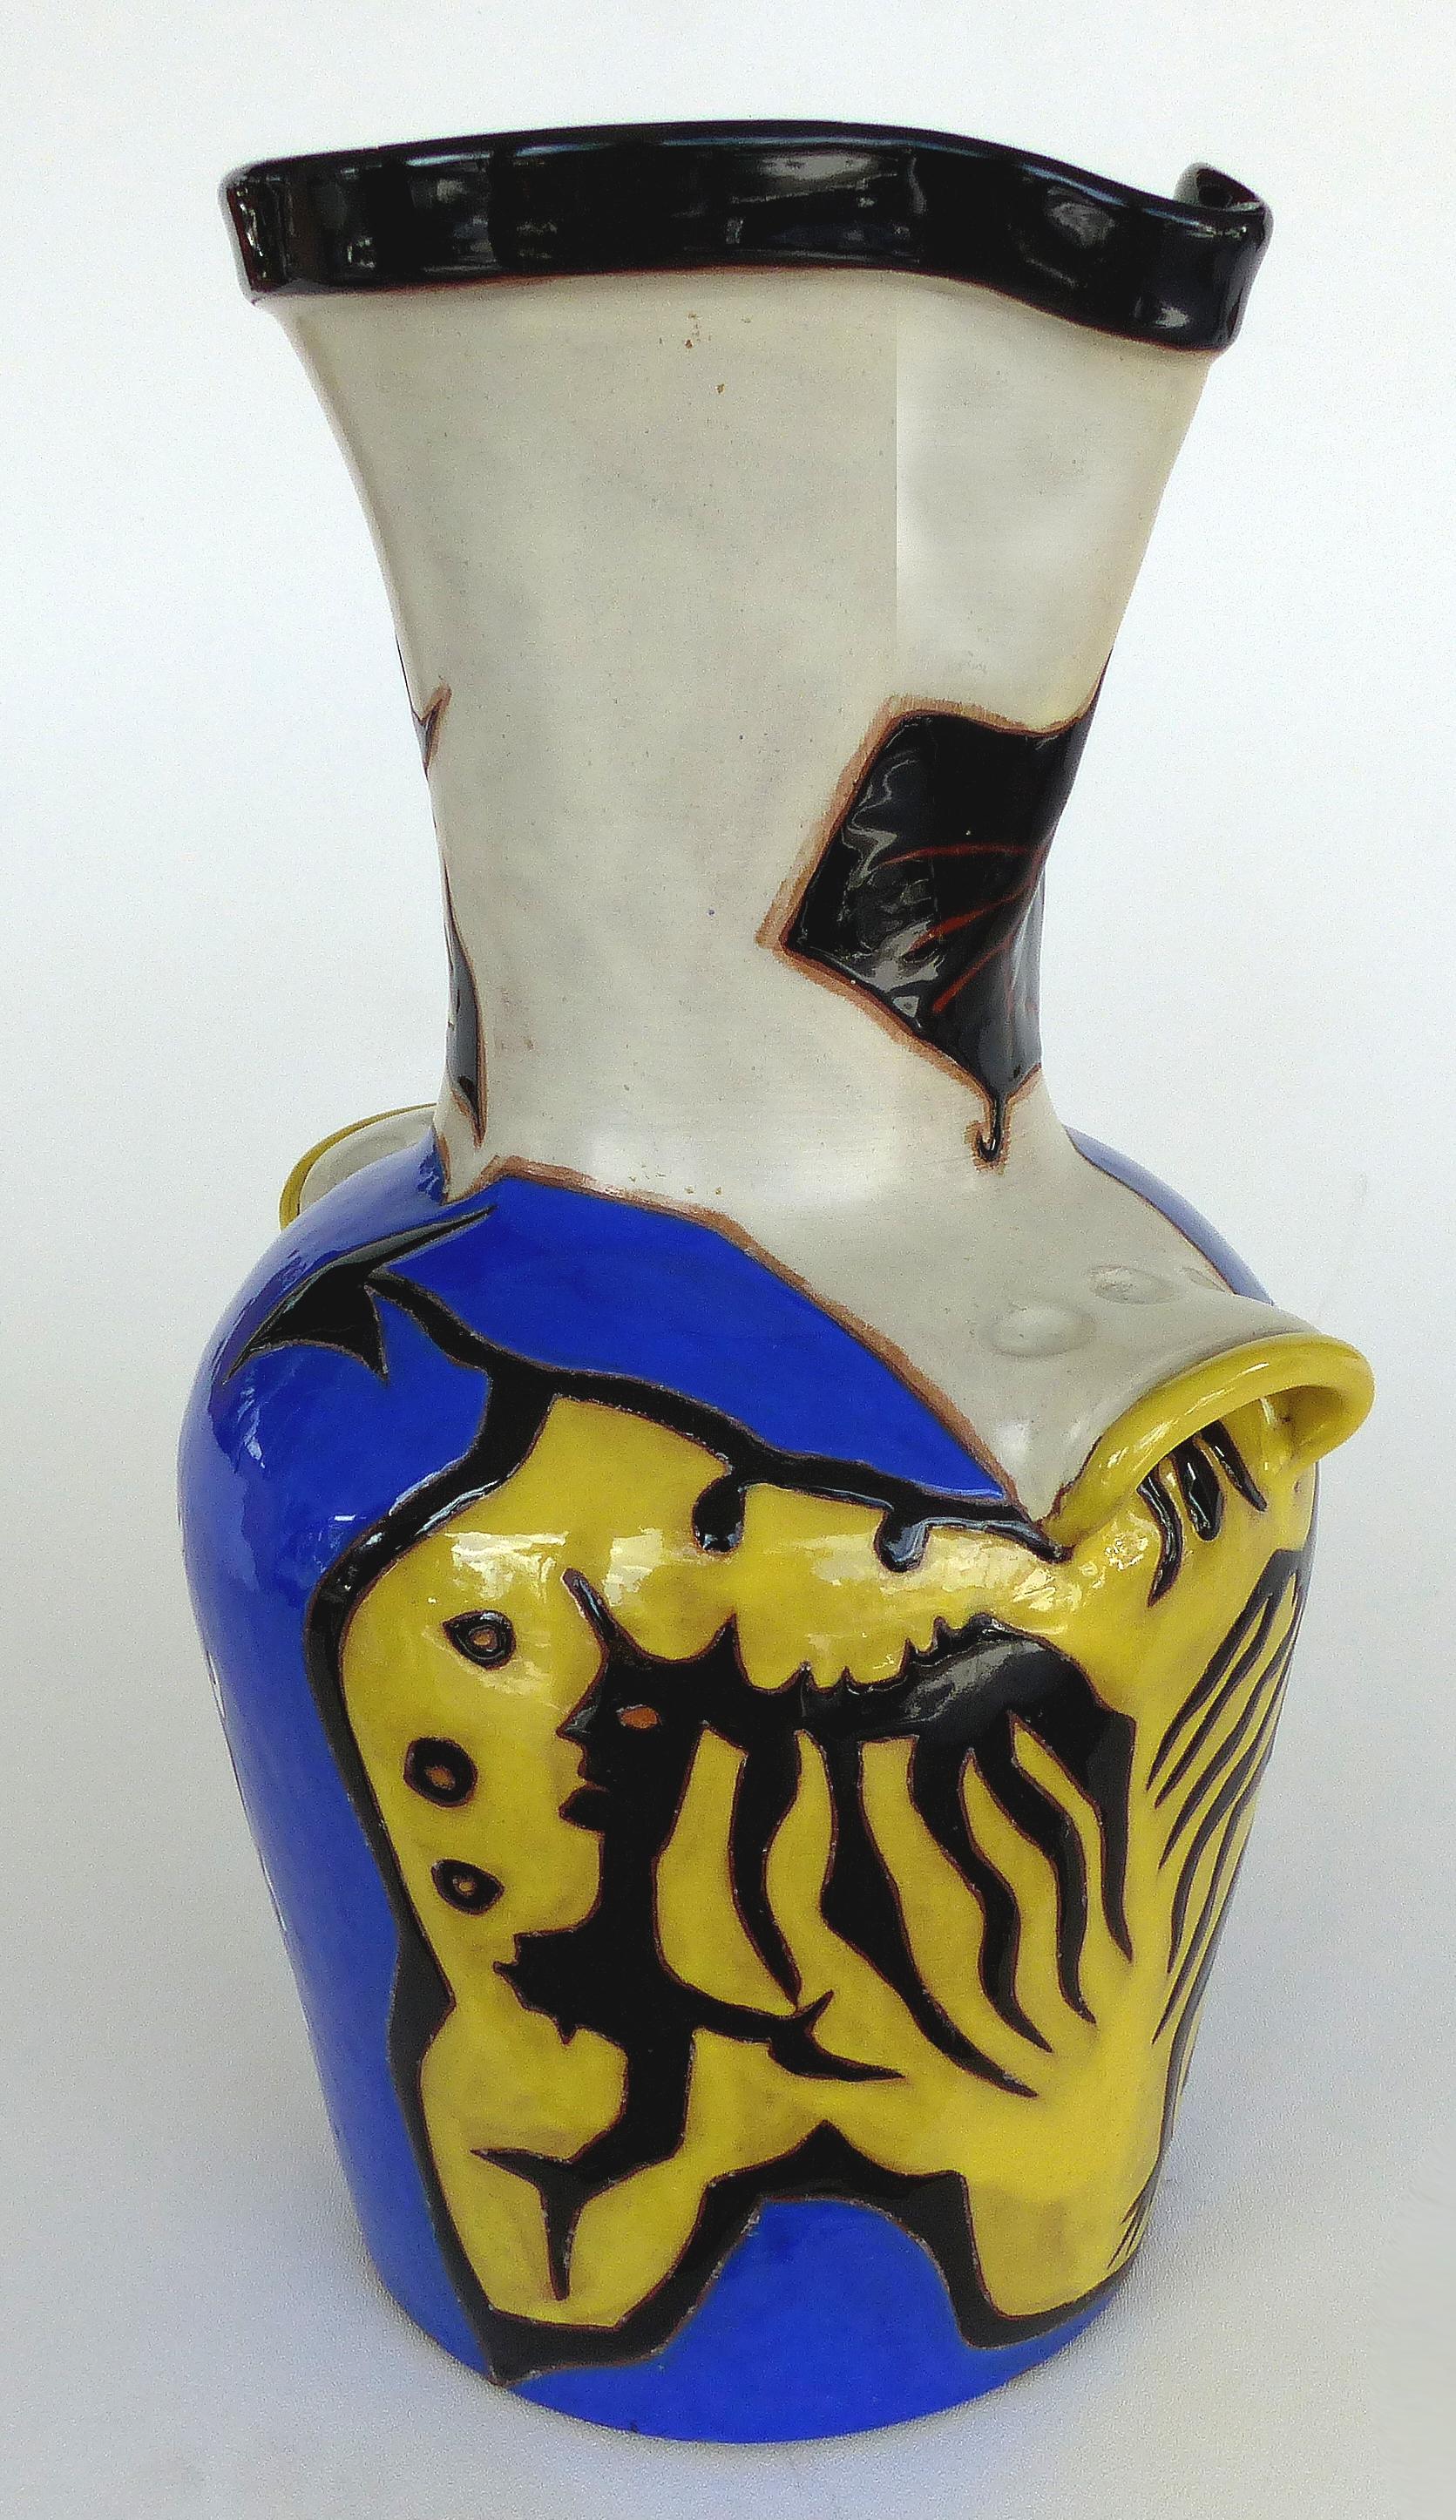 Jean Lurçat French ceramic midcentury vase 22/50

Offered for sale is a limited edition number 22 from an edition of 50 French ceramic two-handled vase by artist Jean Lurçat (1892-1966). This figural vase depicts stylized faces and figures. This